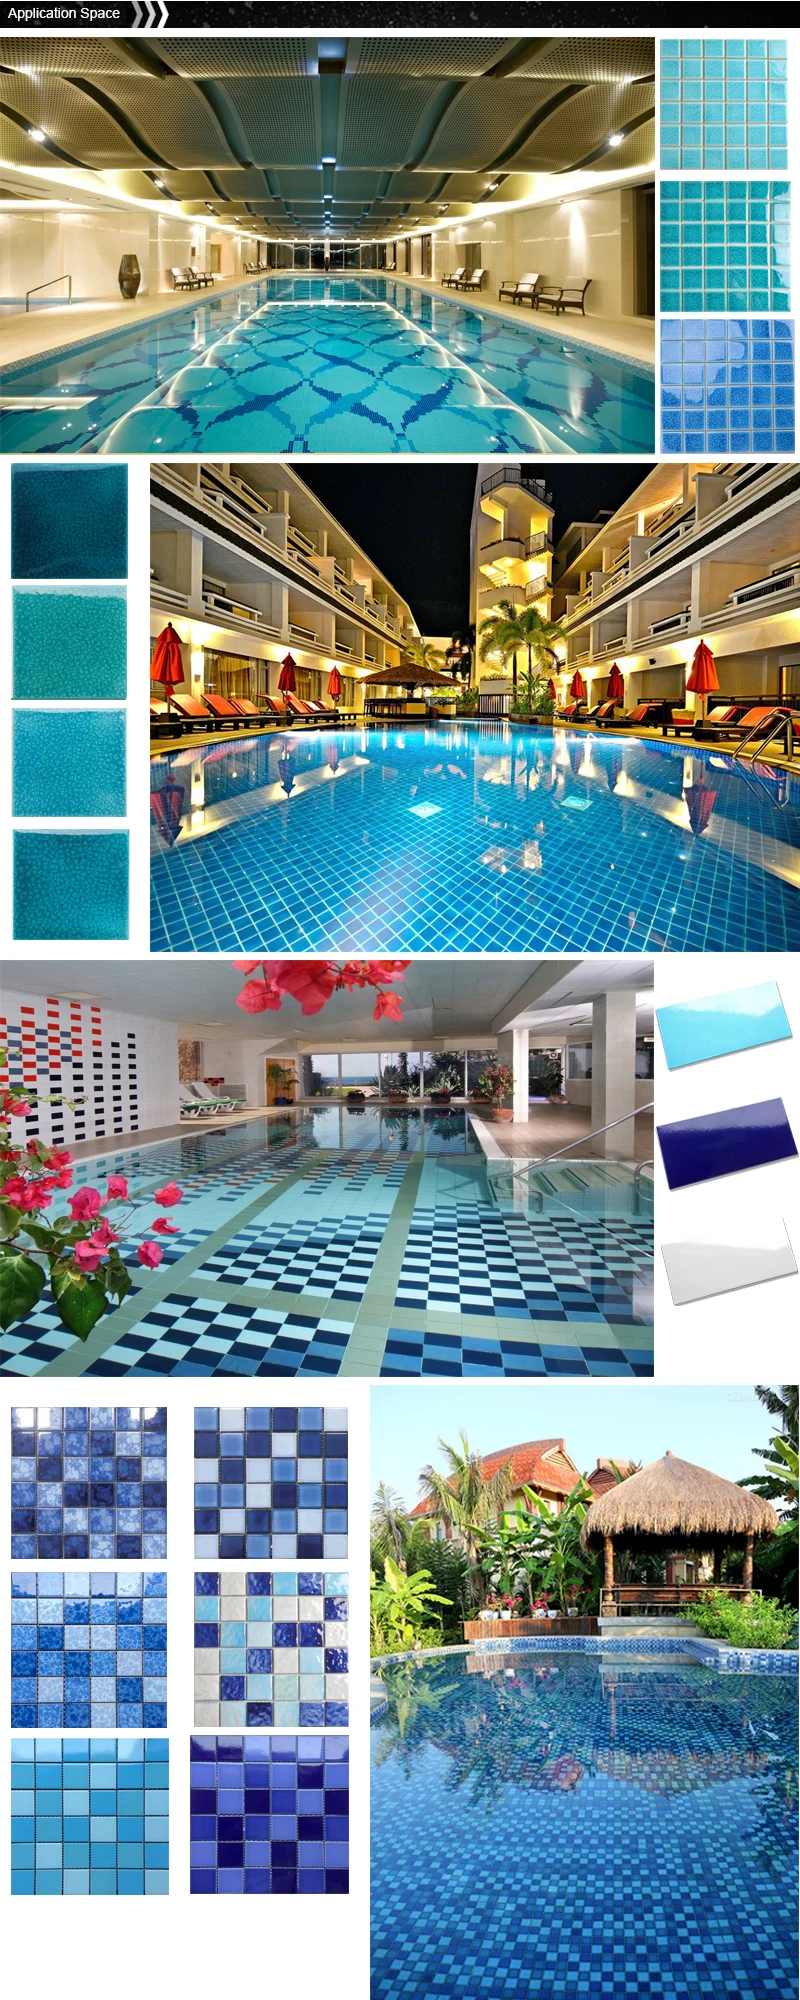 Cheap Price Ceramic Pool Mosaic Tile For Swimming Pool - Buy Pool Mosaic,Swimming  Pool Mosaic,Mosaic Product on Alibaba.com